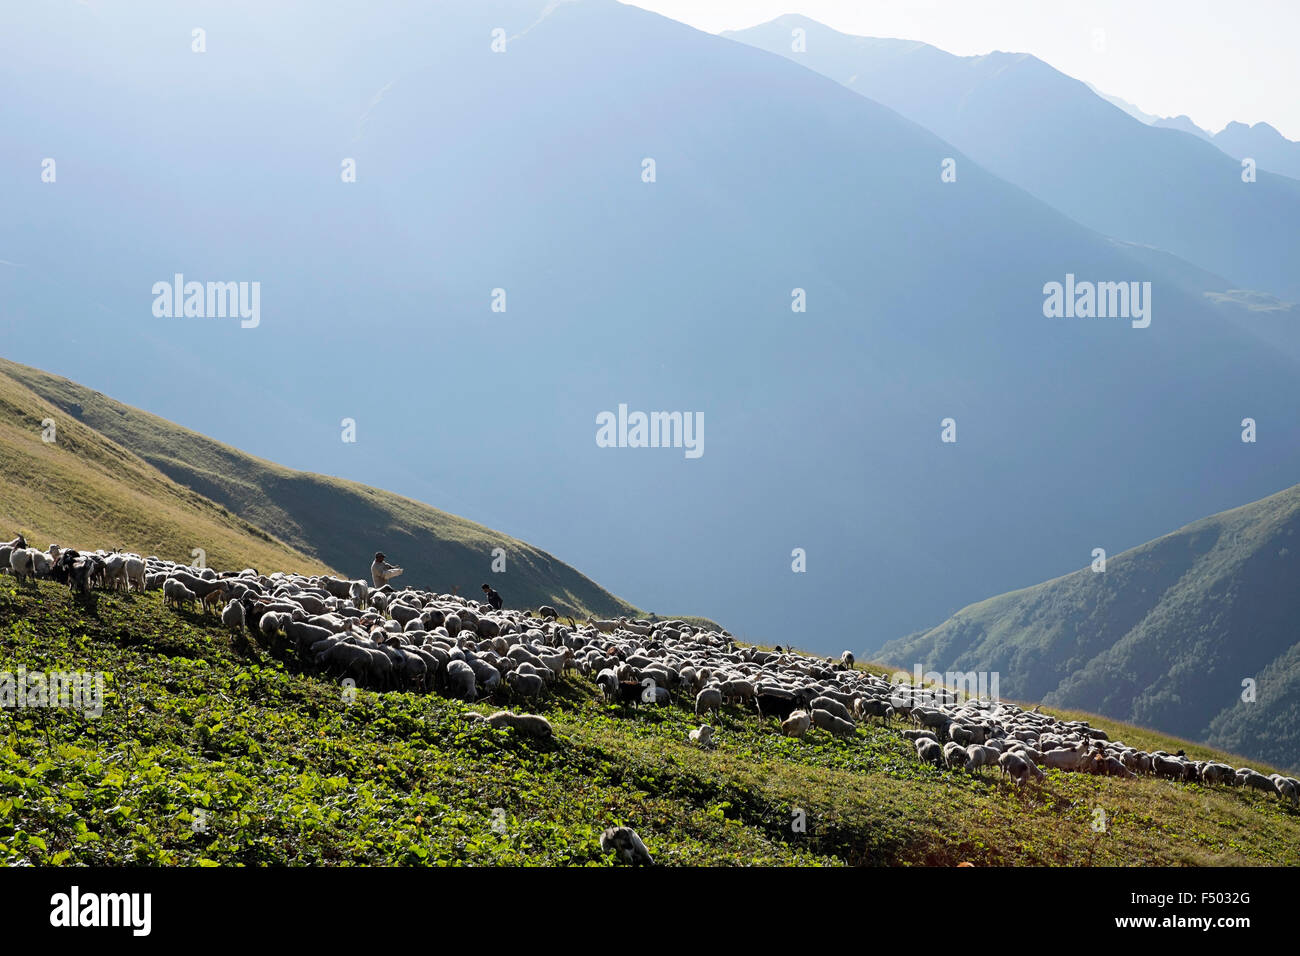 General view of the Caucasus Mountains in Georgia, Asia. These images feature Georgian men looking after their flock Stock Photo